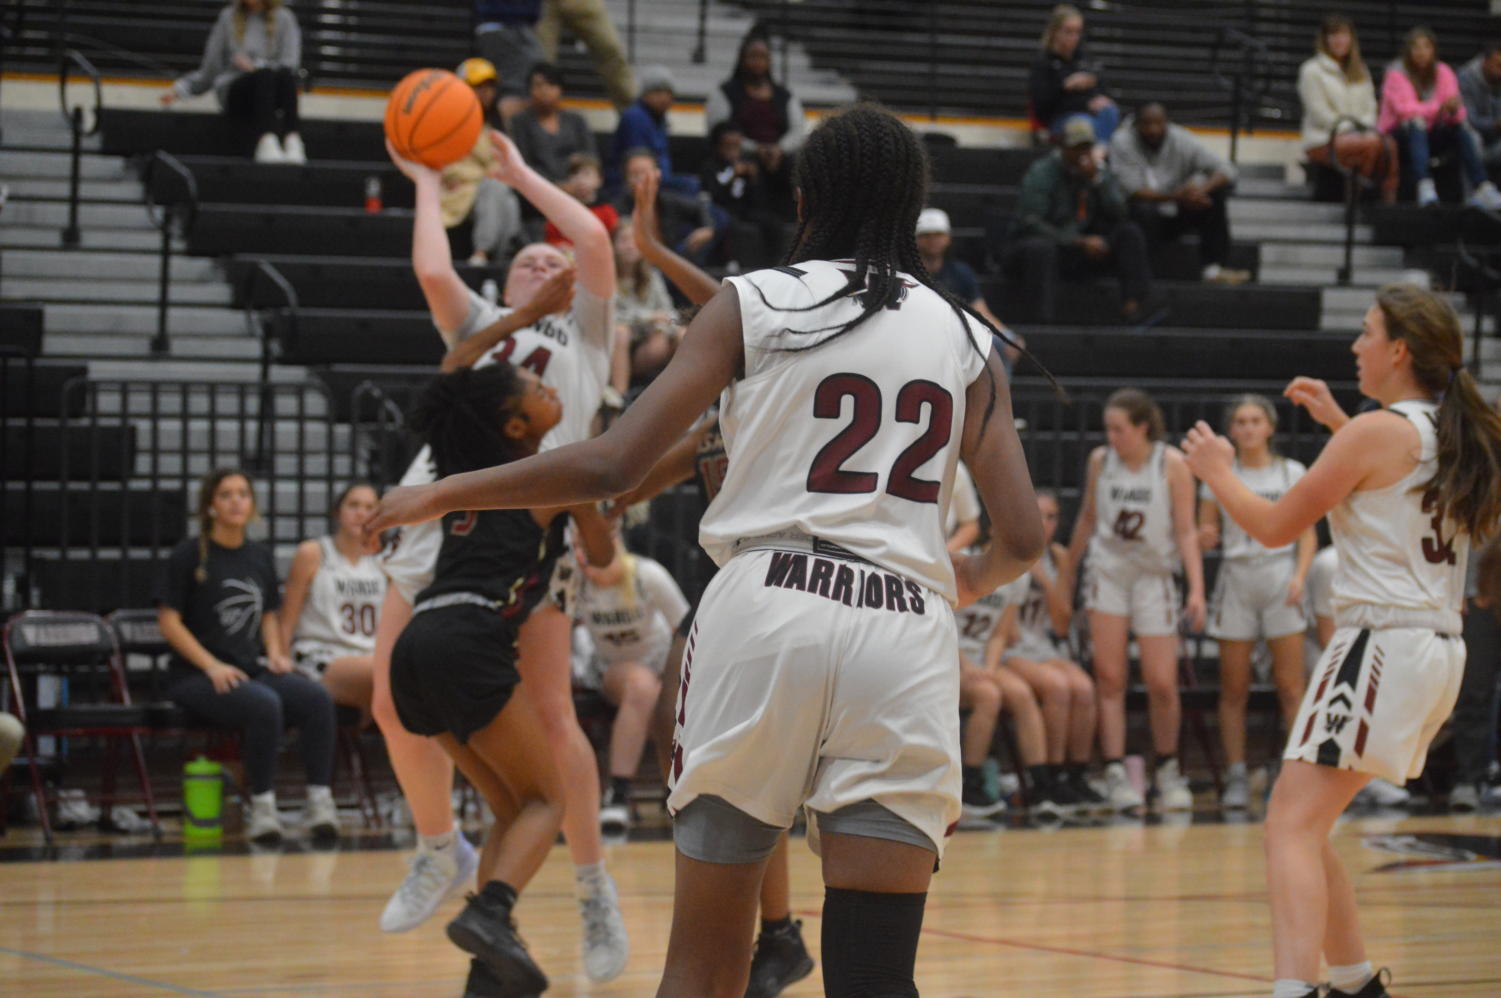 Malaya Mazyck ready for her teammate, senior Ava Curry, to pass her the ball while Currys opponent on Ashley Ridge is defending her.
